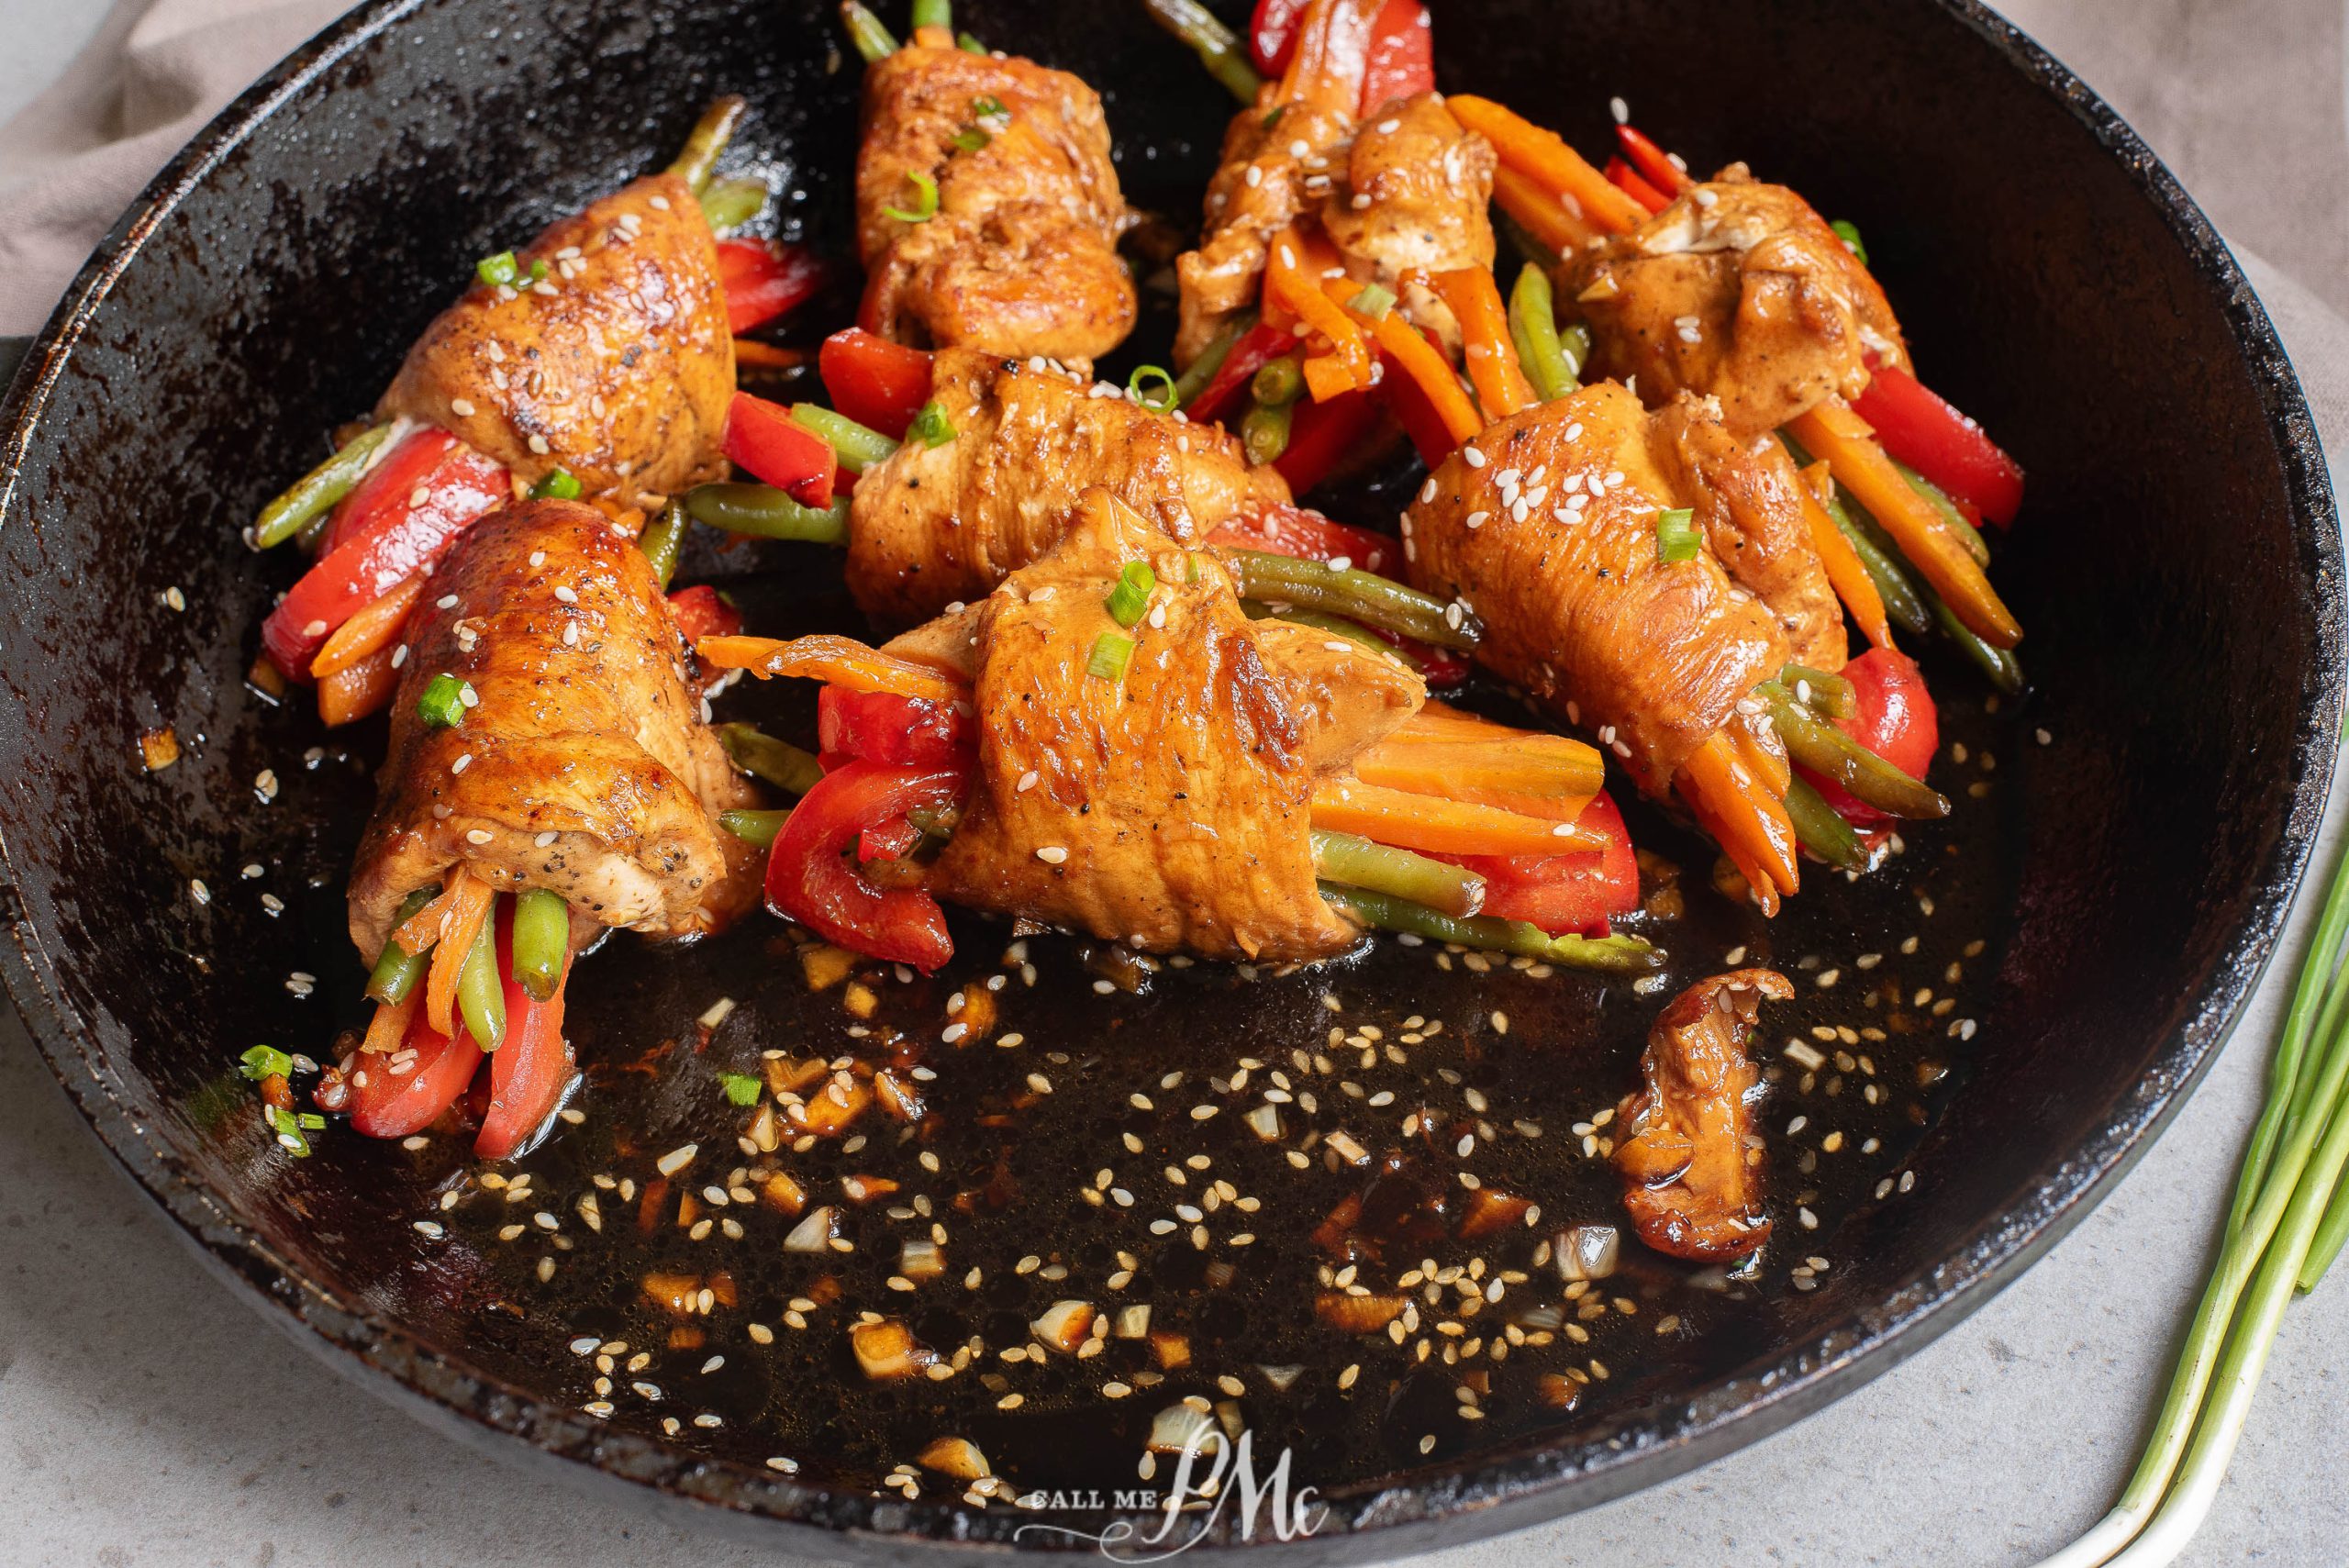 A frying pan with chicken and vegetables in it.